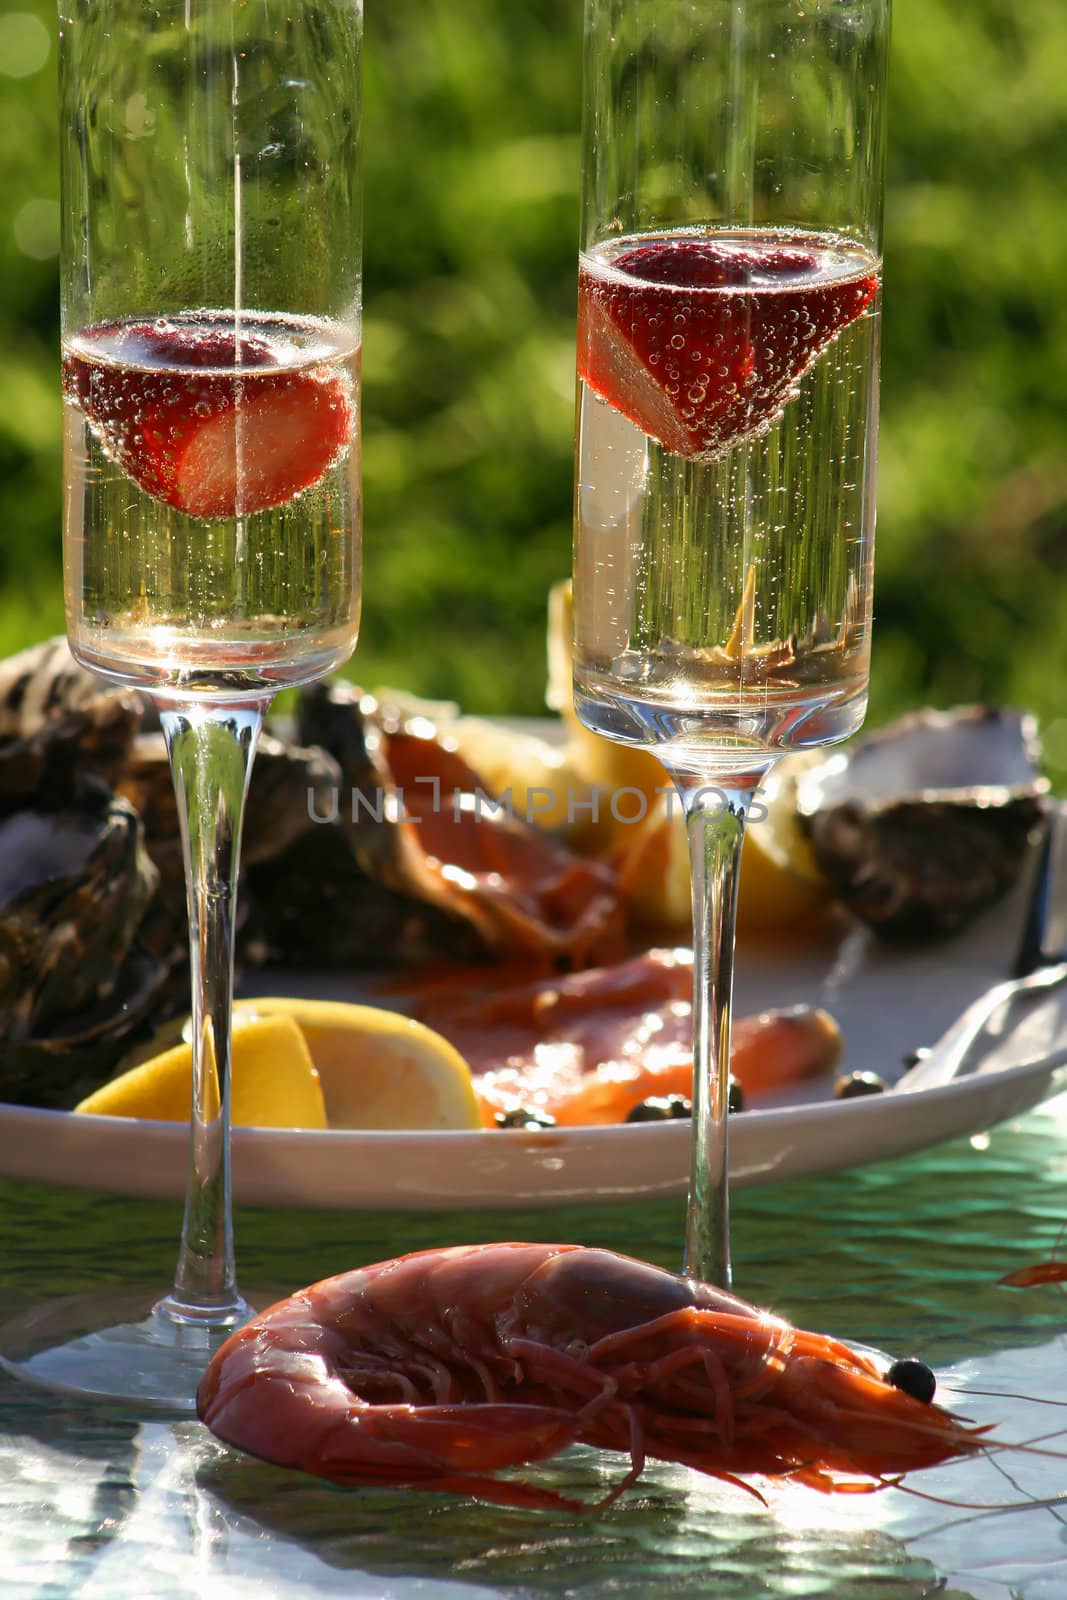 Bubbles and Seafood by rogerrosentreter